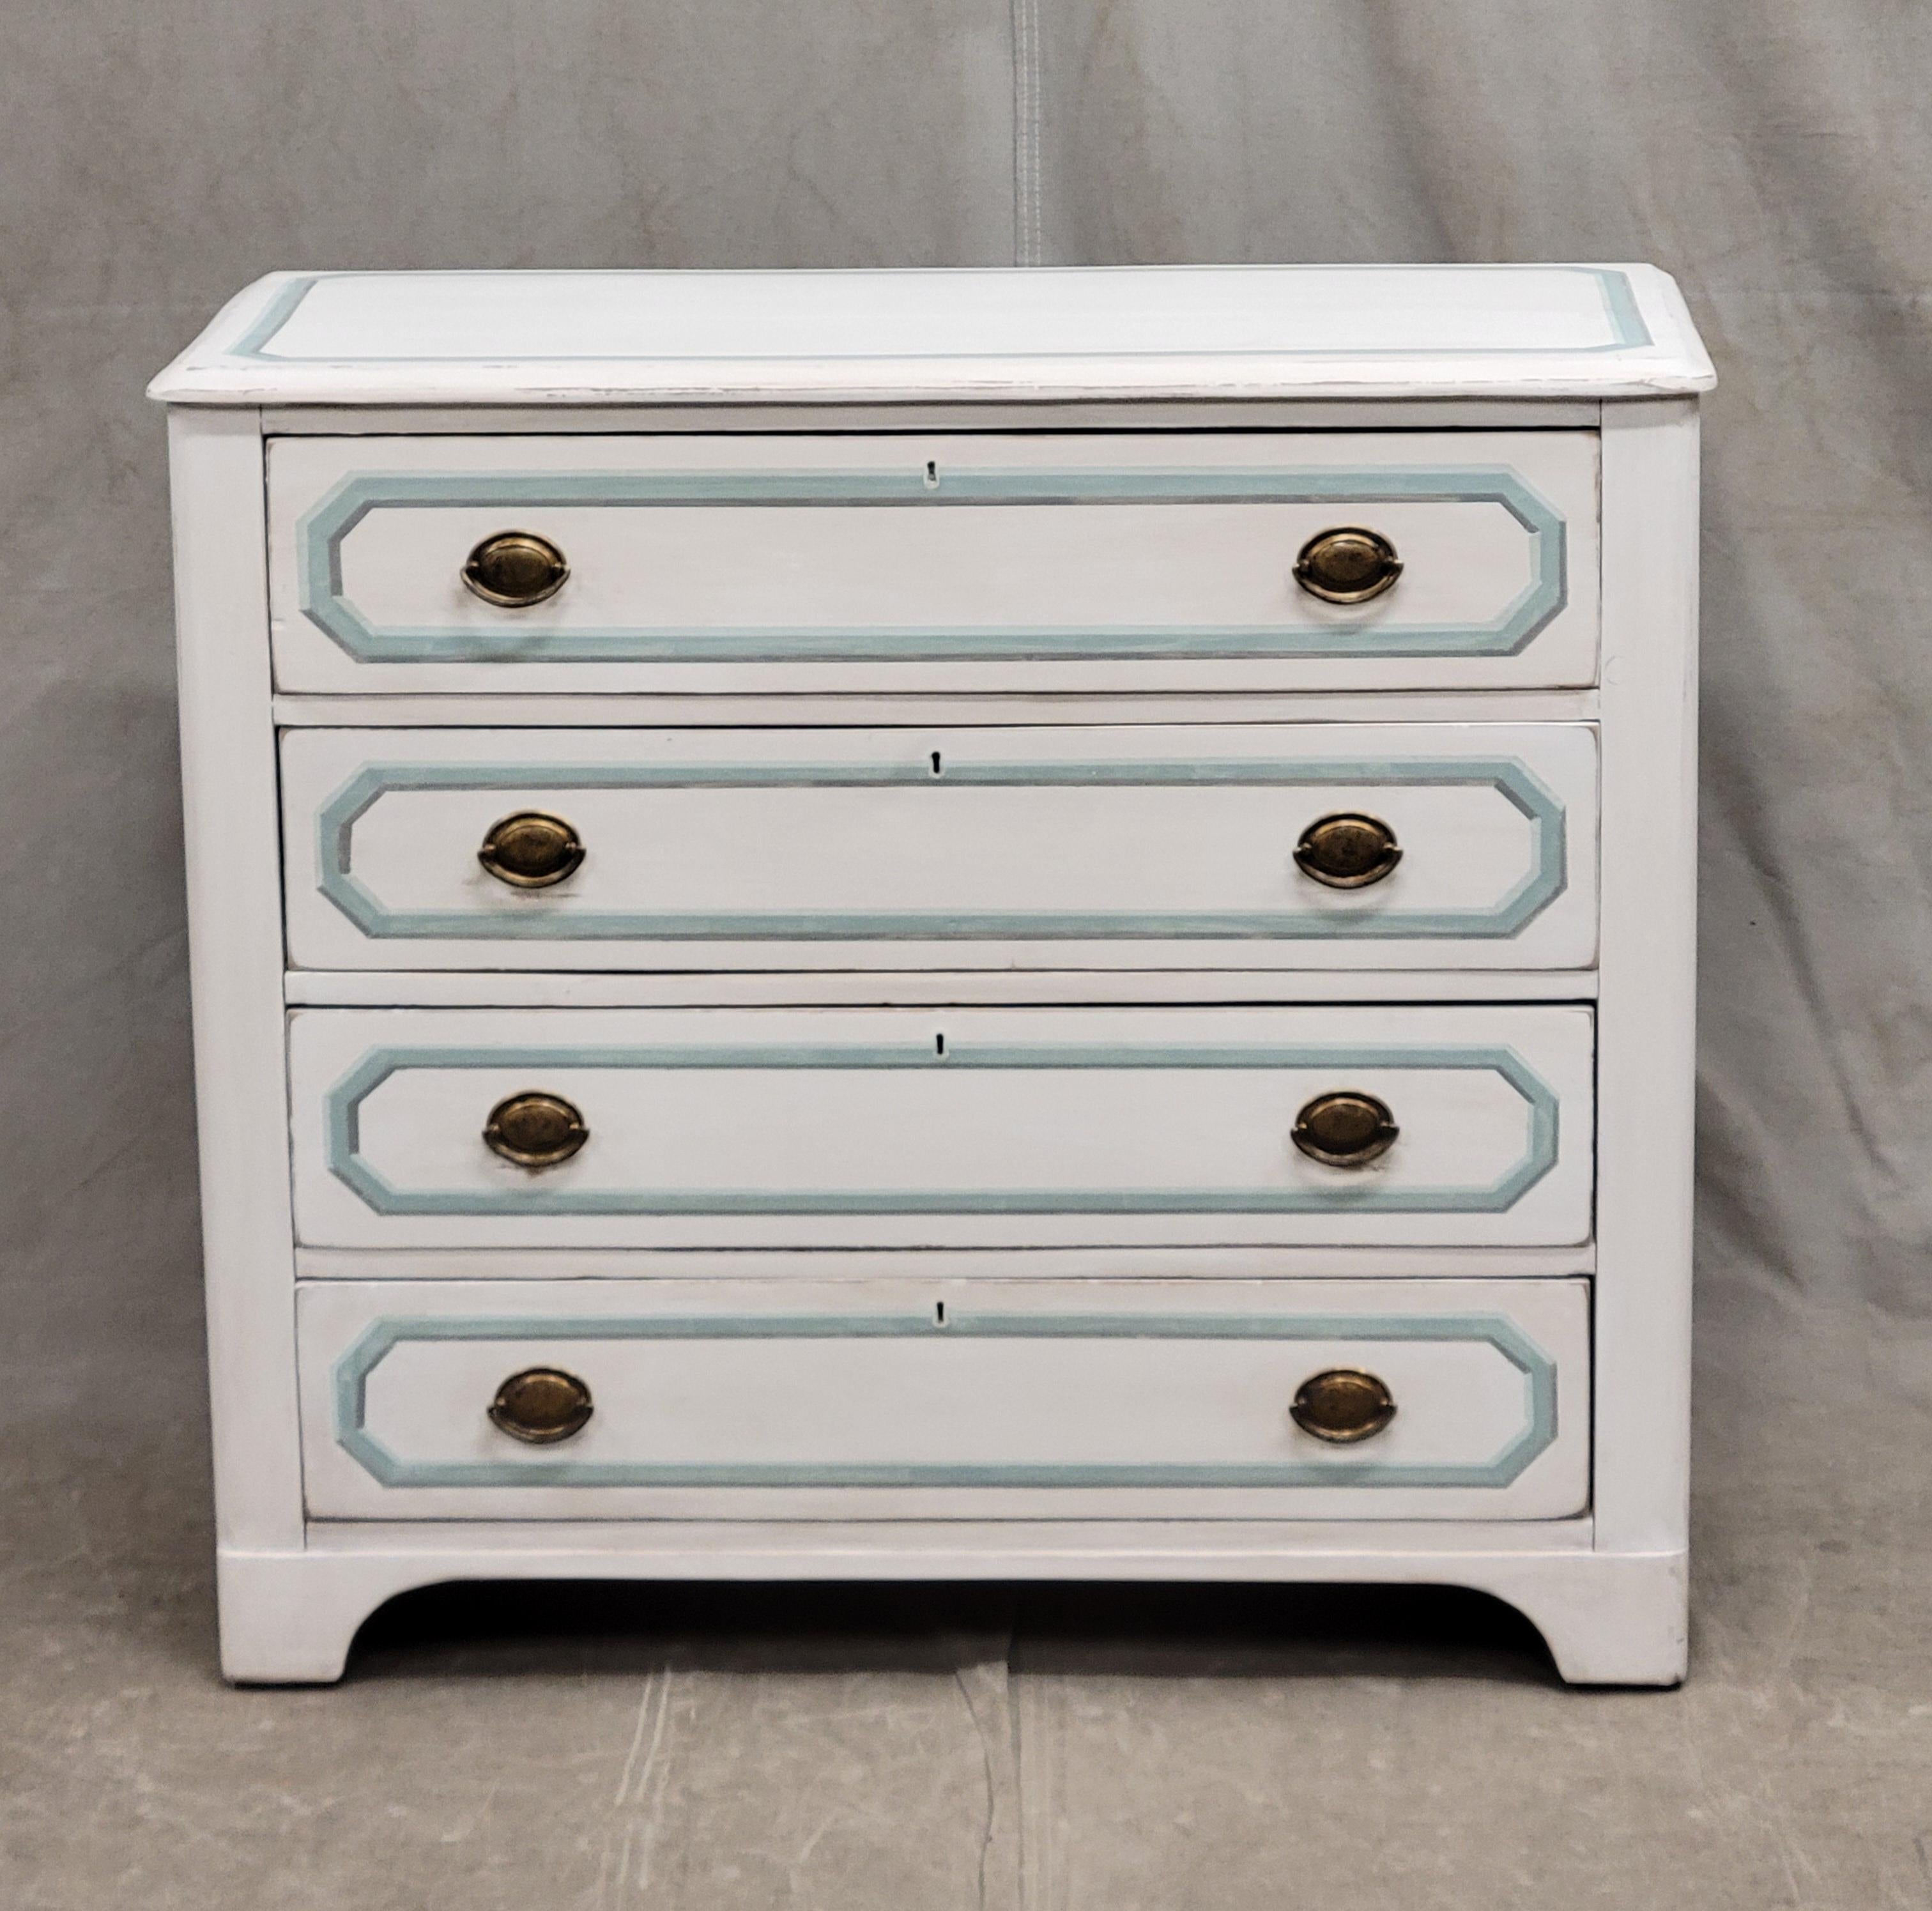 An elegant and functional antique pine dresser with bracket feet, painted white and accented in an aqua blue and gray French line motif. Note the distressed areas in the paint. Brass pull rings add to the elegance of this piece. Strong and sturdy,